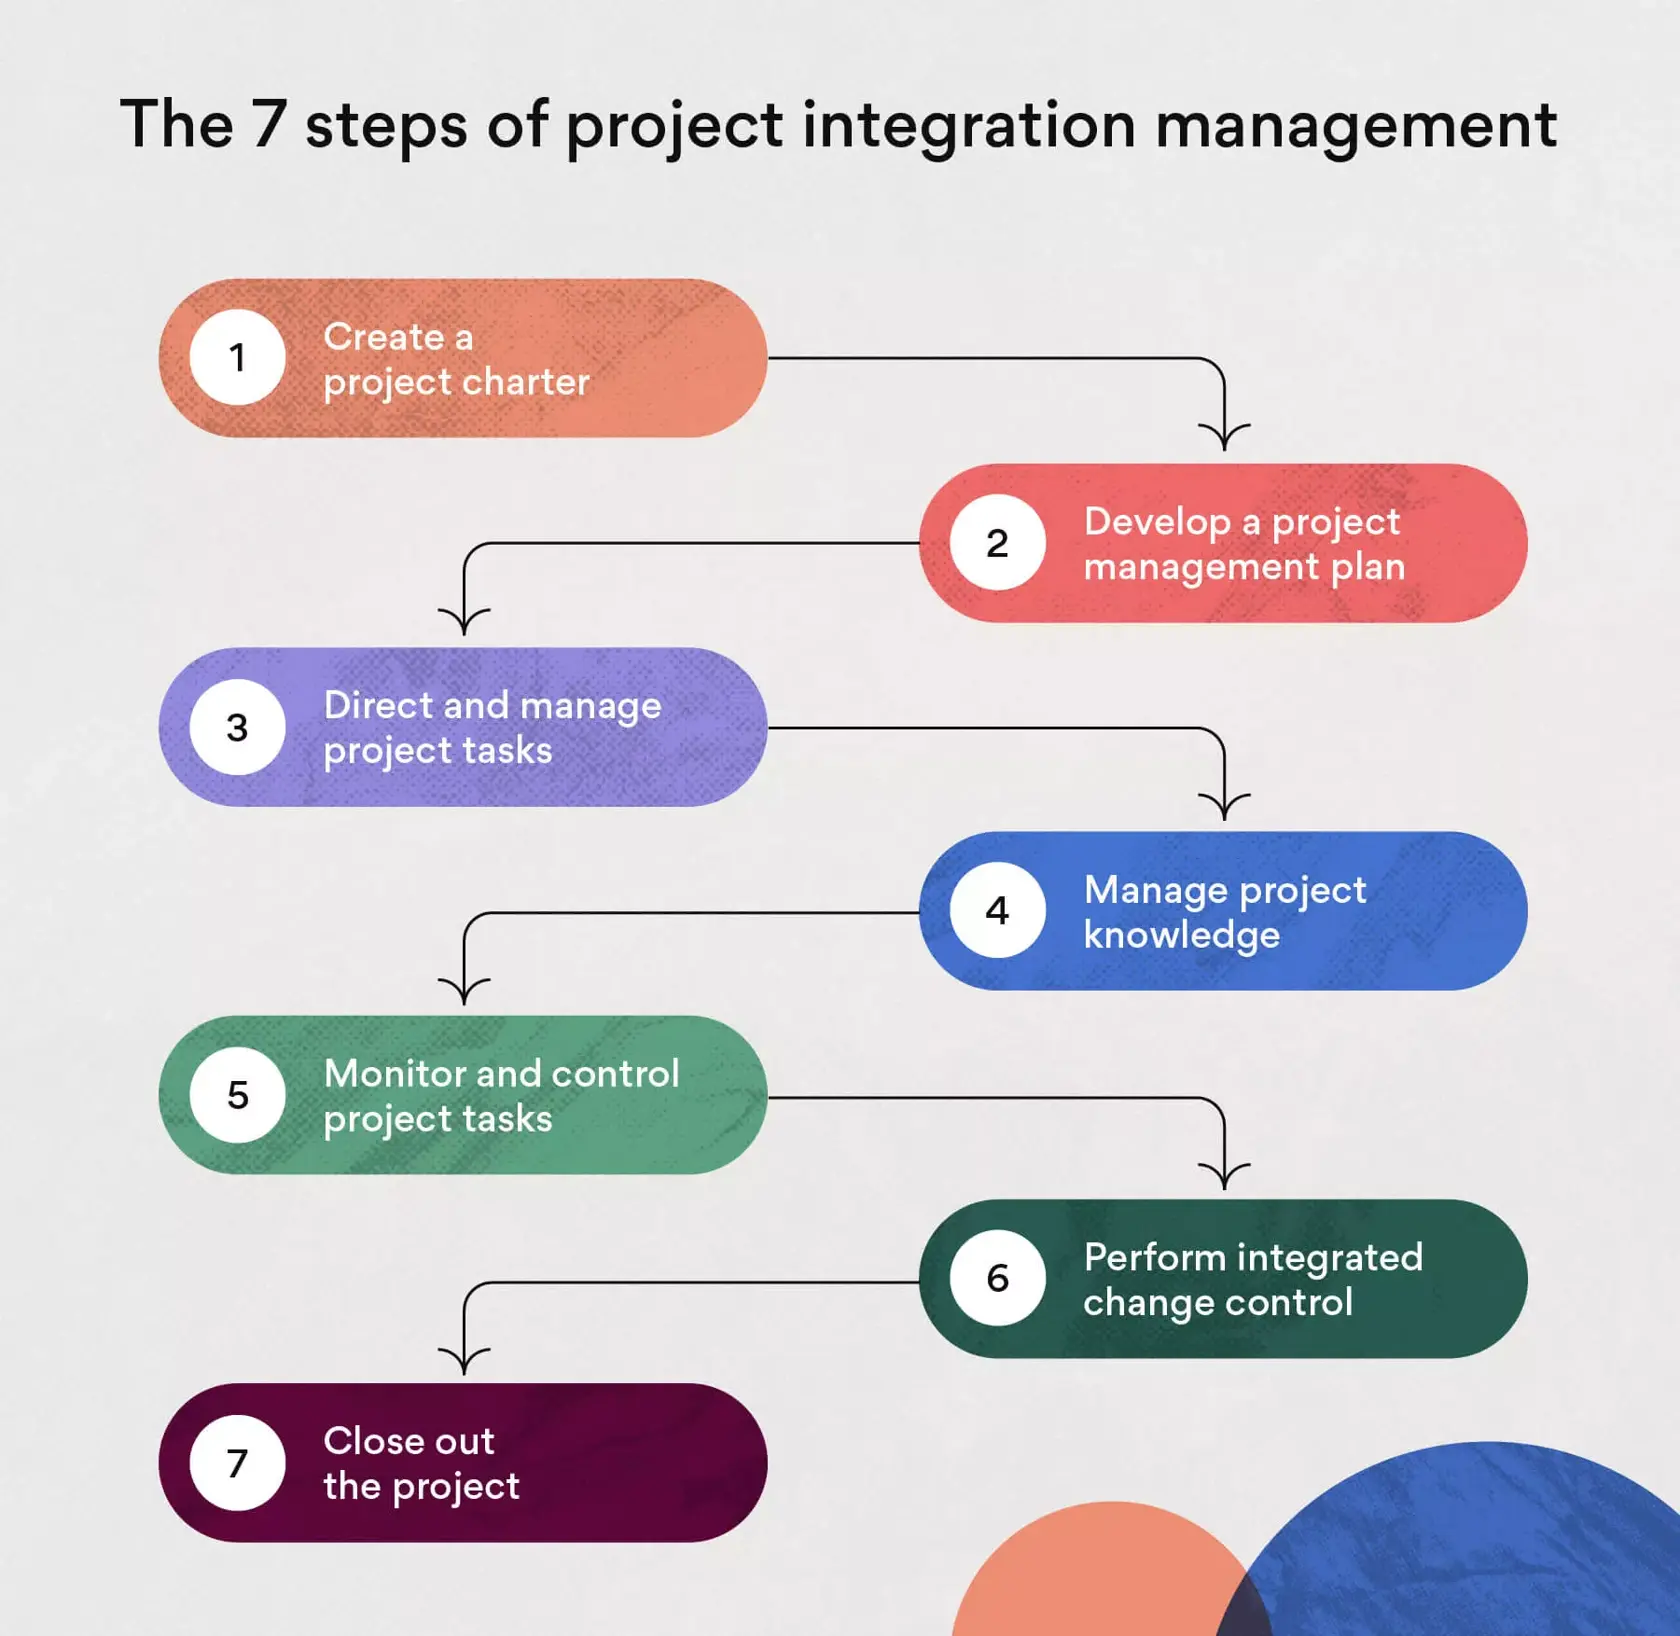 [inline illustration] The 7 steps of project integration management (infographic)